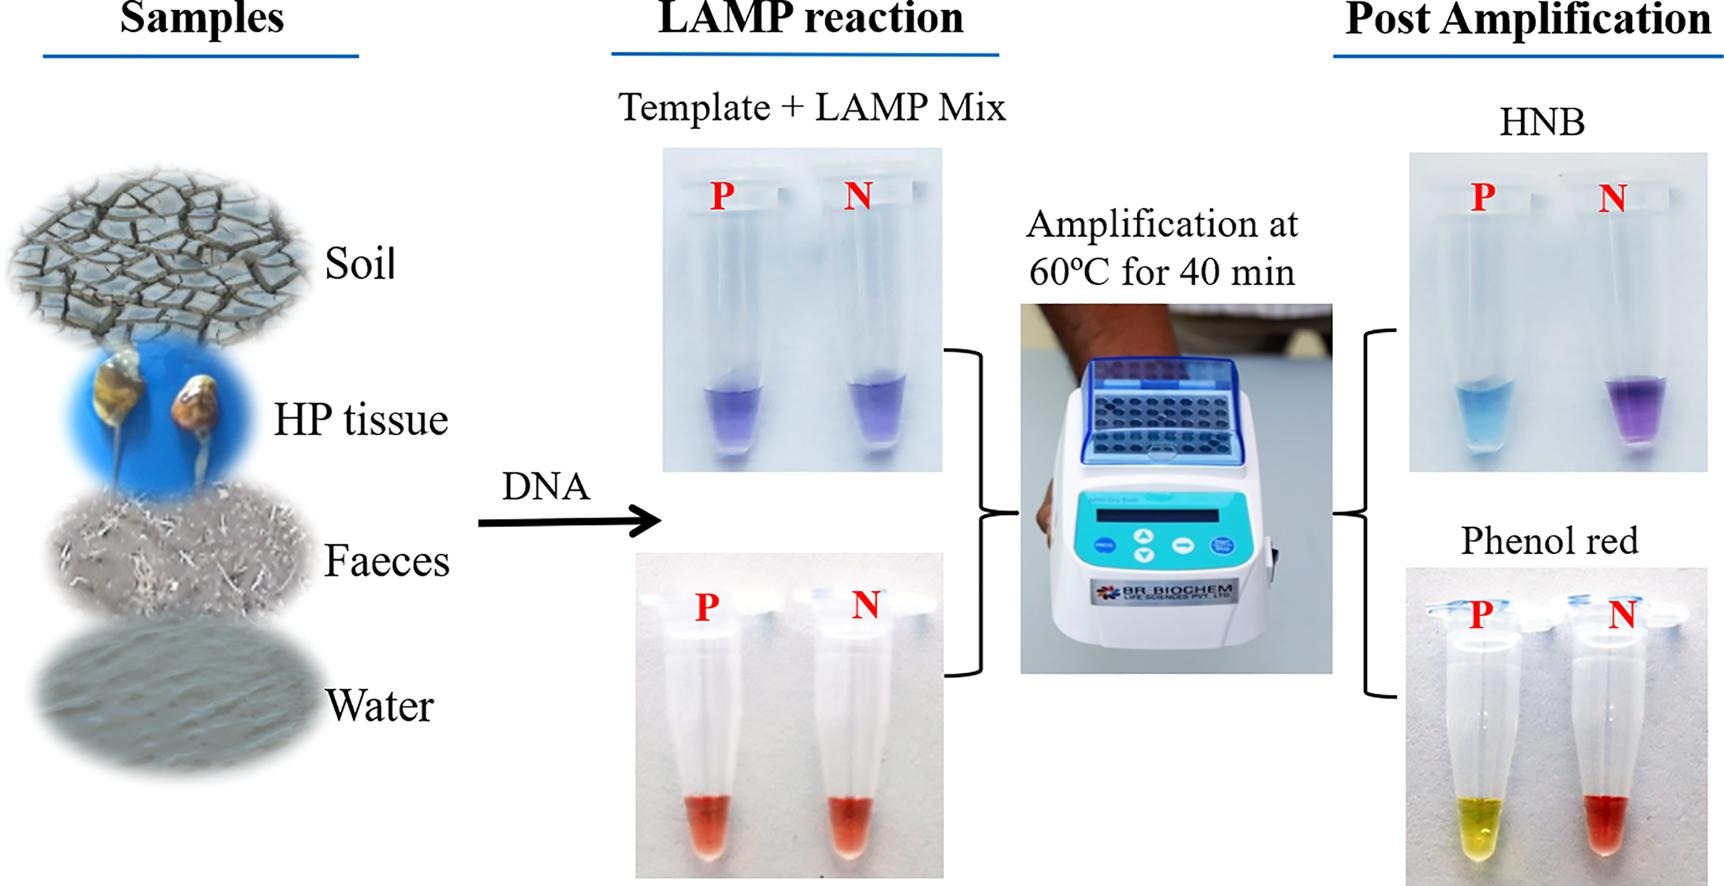 closed-tube-field-deployable-loop-mediated-isothermal-amplification-lamp-assay-based-on-spore-wall-protein-swp-for-the-visual-detection-of-enterocytozoon-hepatopenaei-ehp